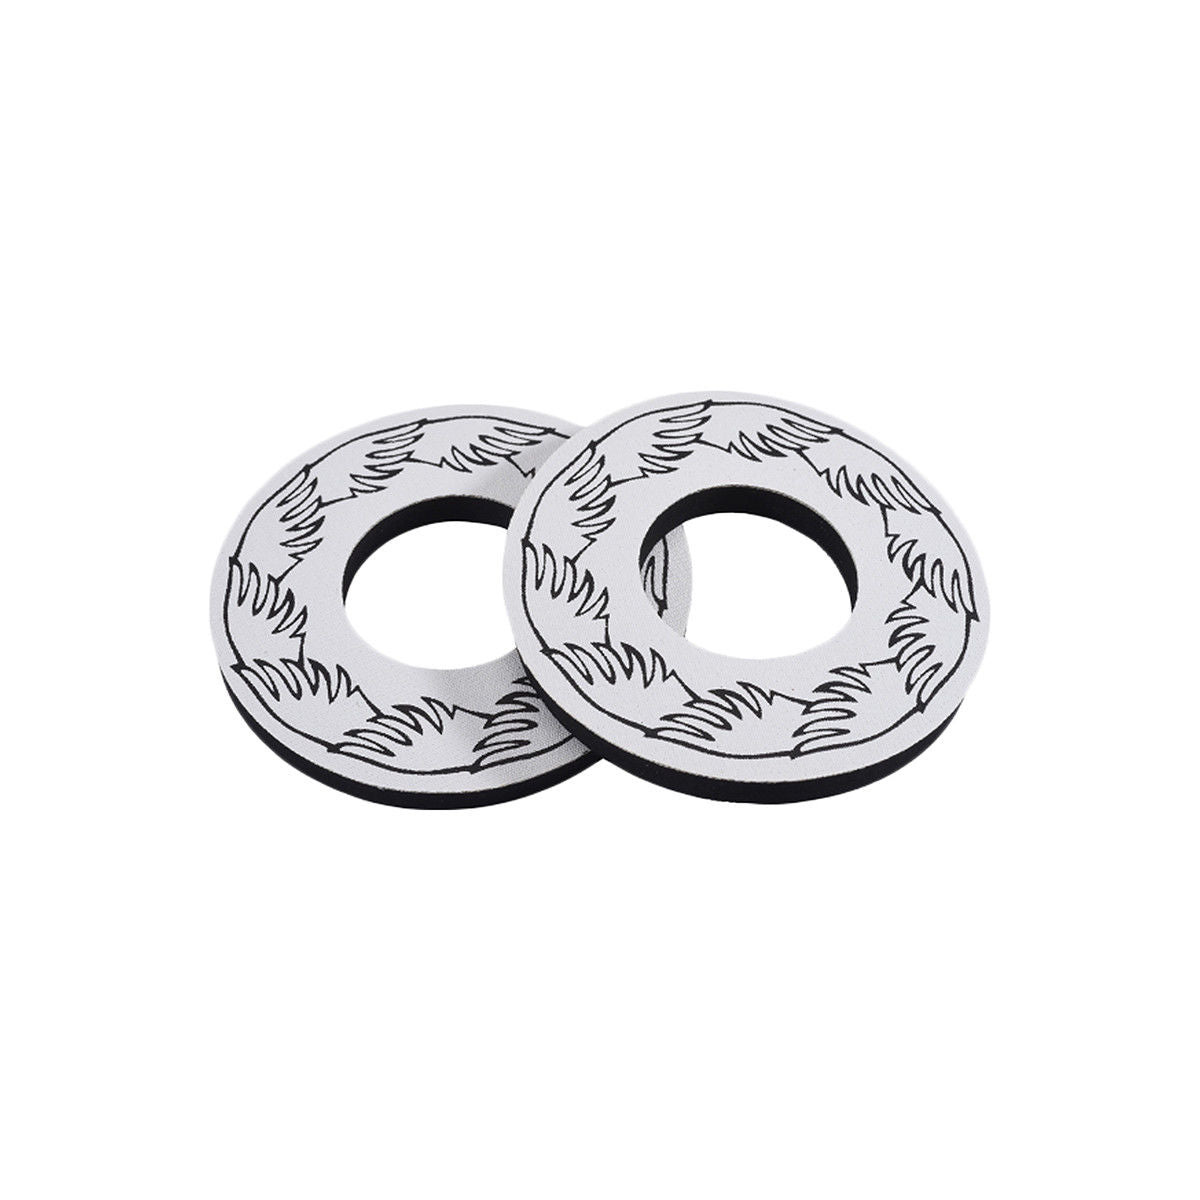 SE Racing Wing BMX Grip Donuts - White